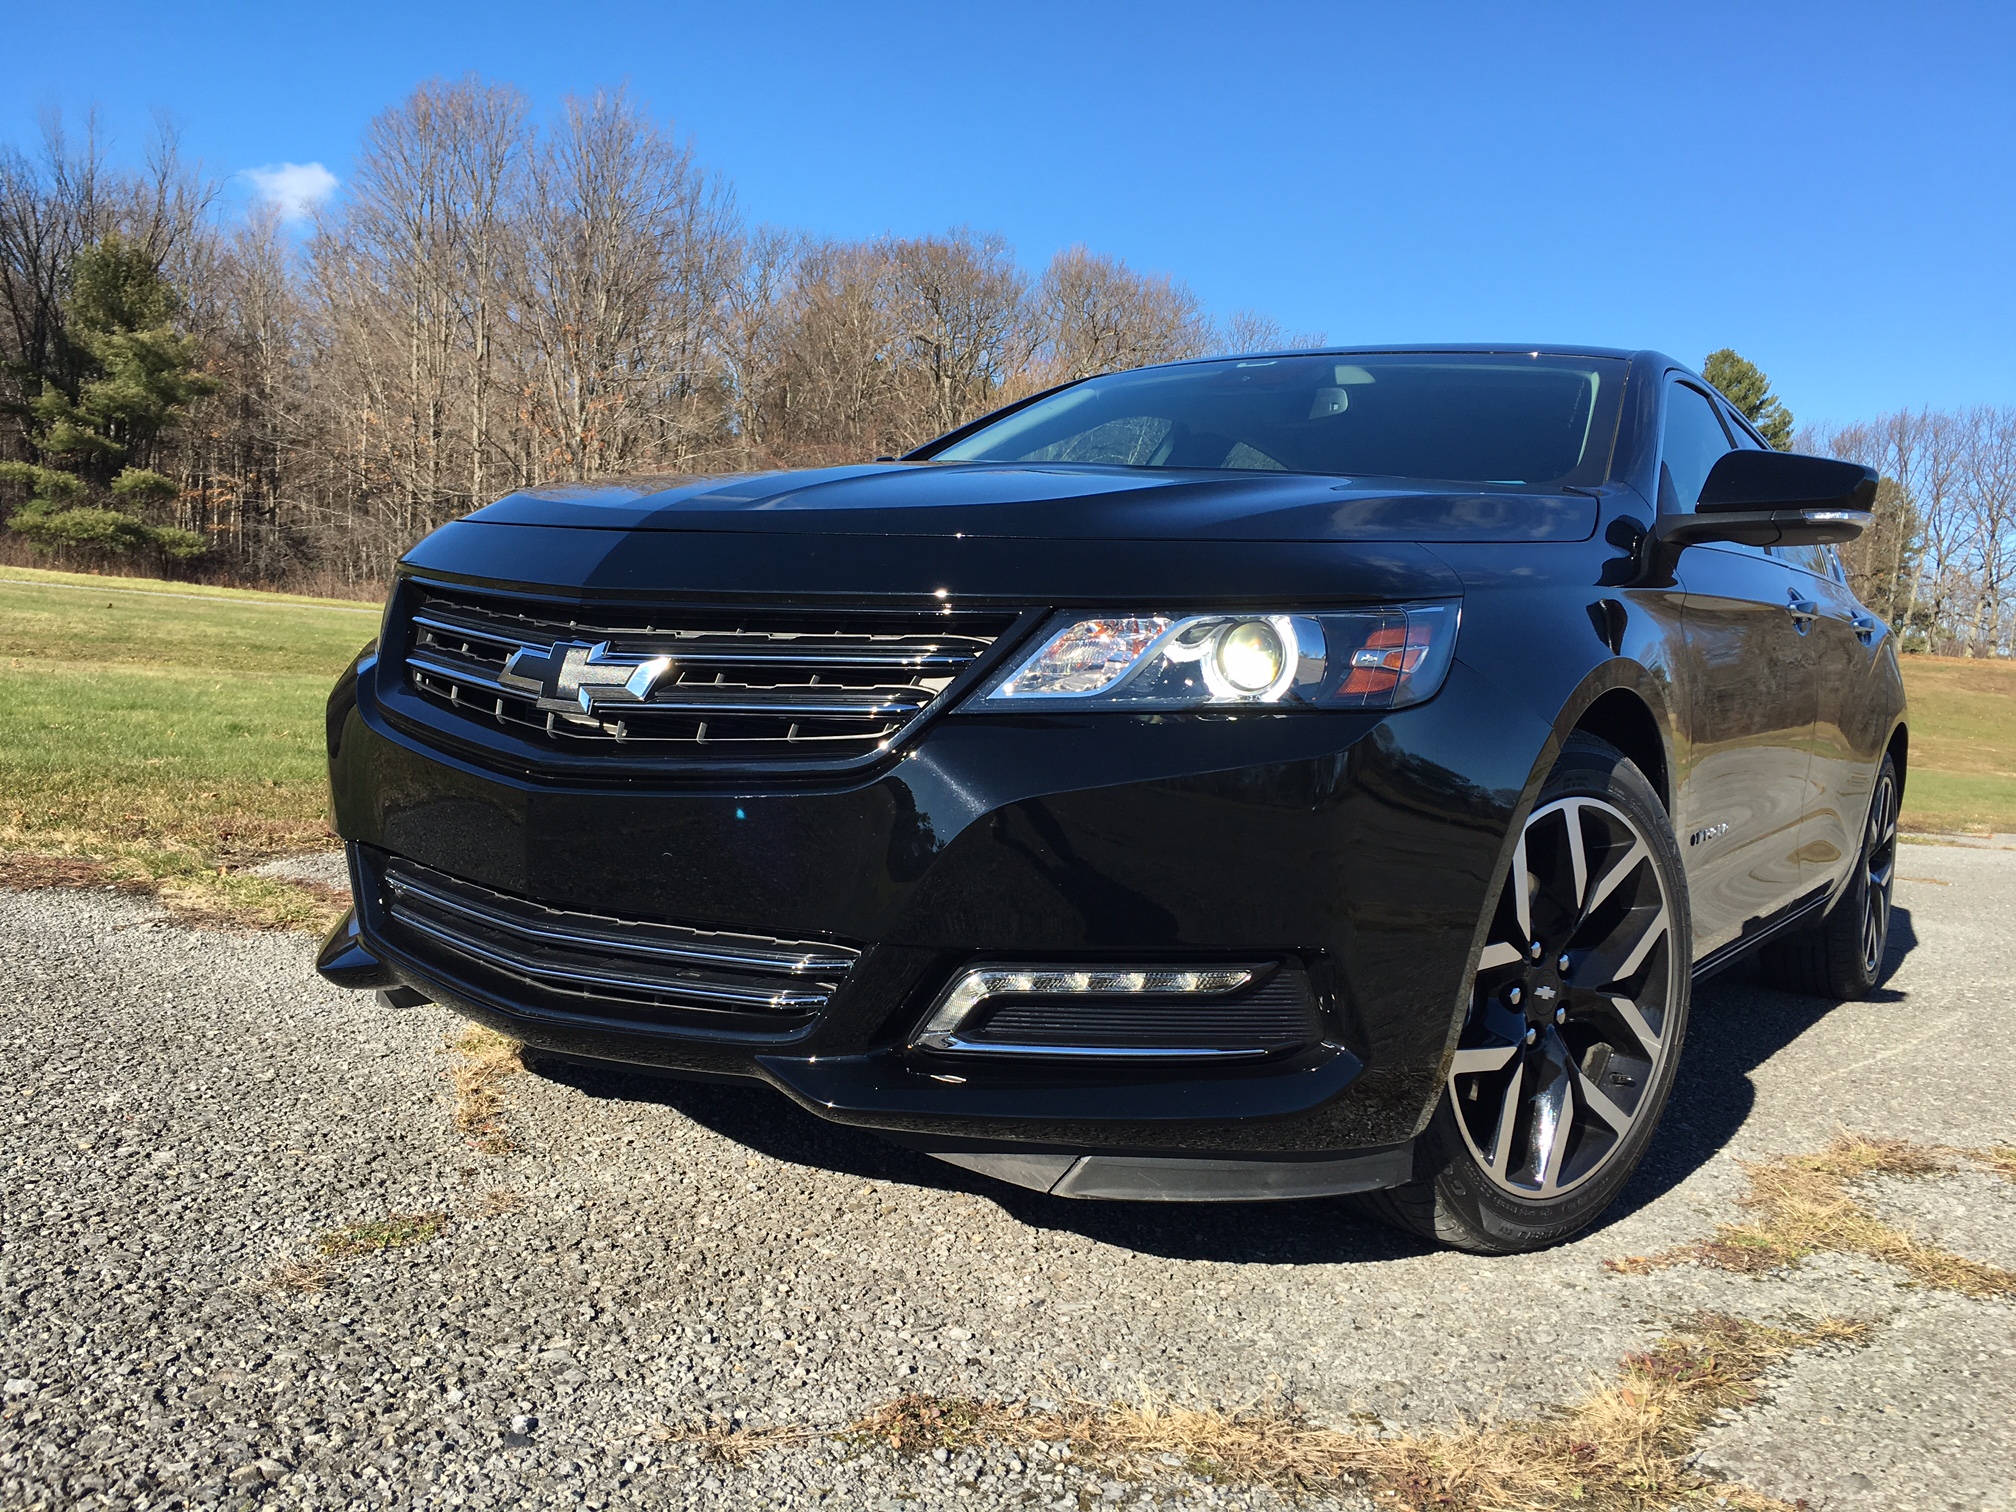 2016 Chevrolet Impala Midnight Edition Video Review by Steve Hammes